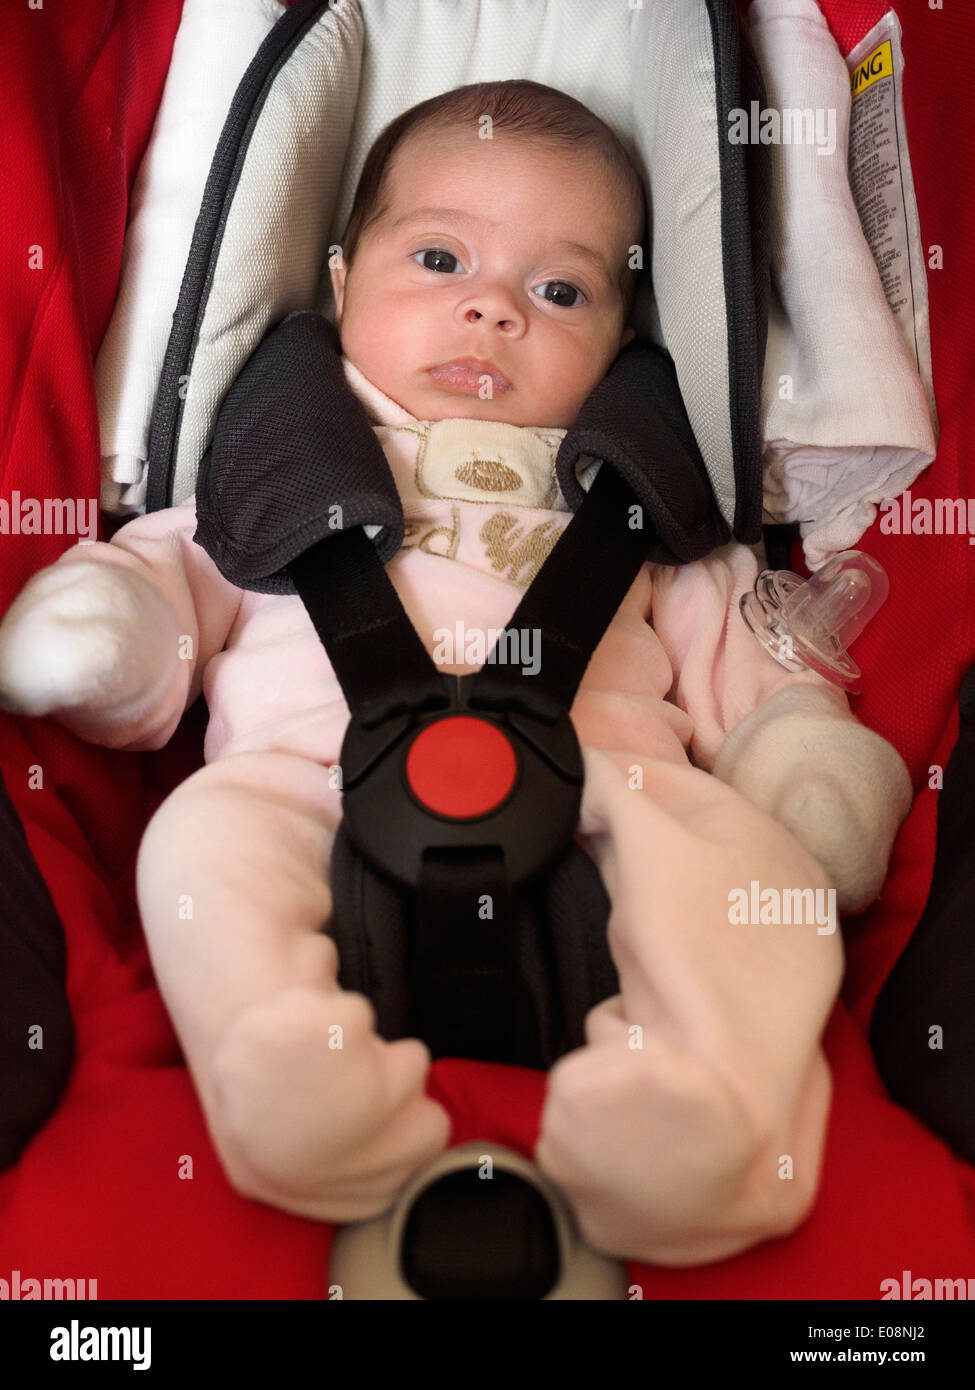 Baby strapped into a car seat Stock Photo